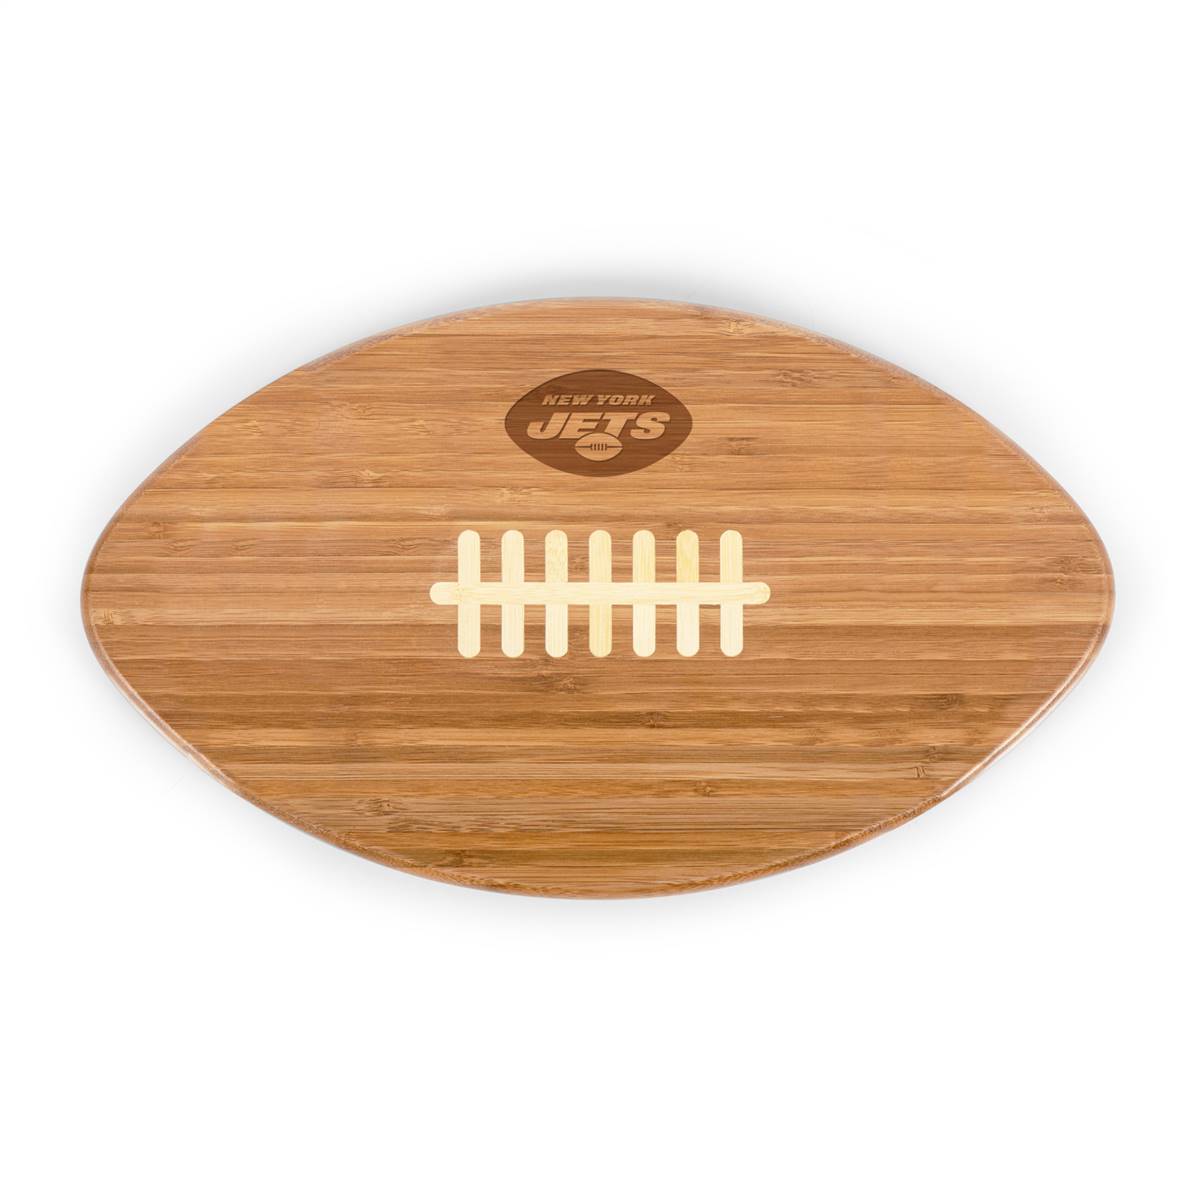 New York Jets Football Cutting Board - image 1 of 5